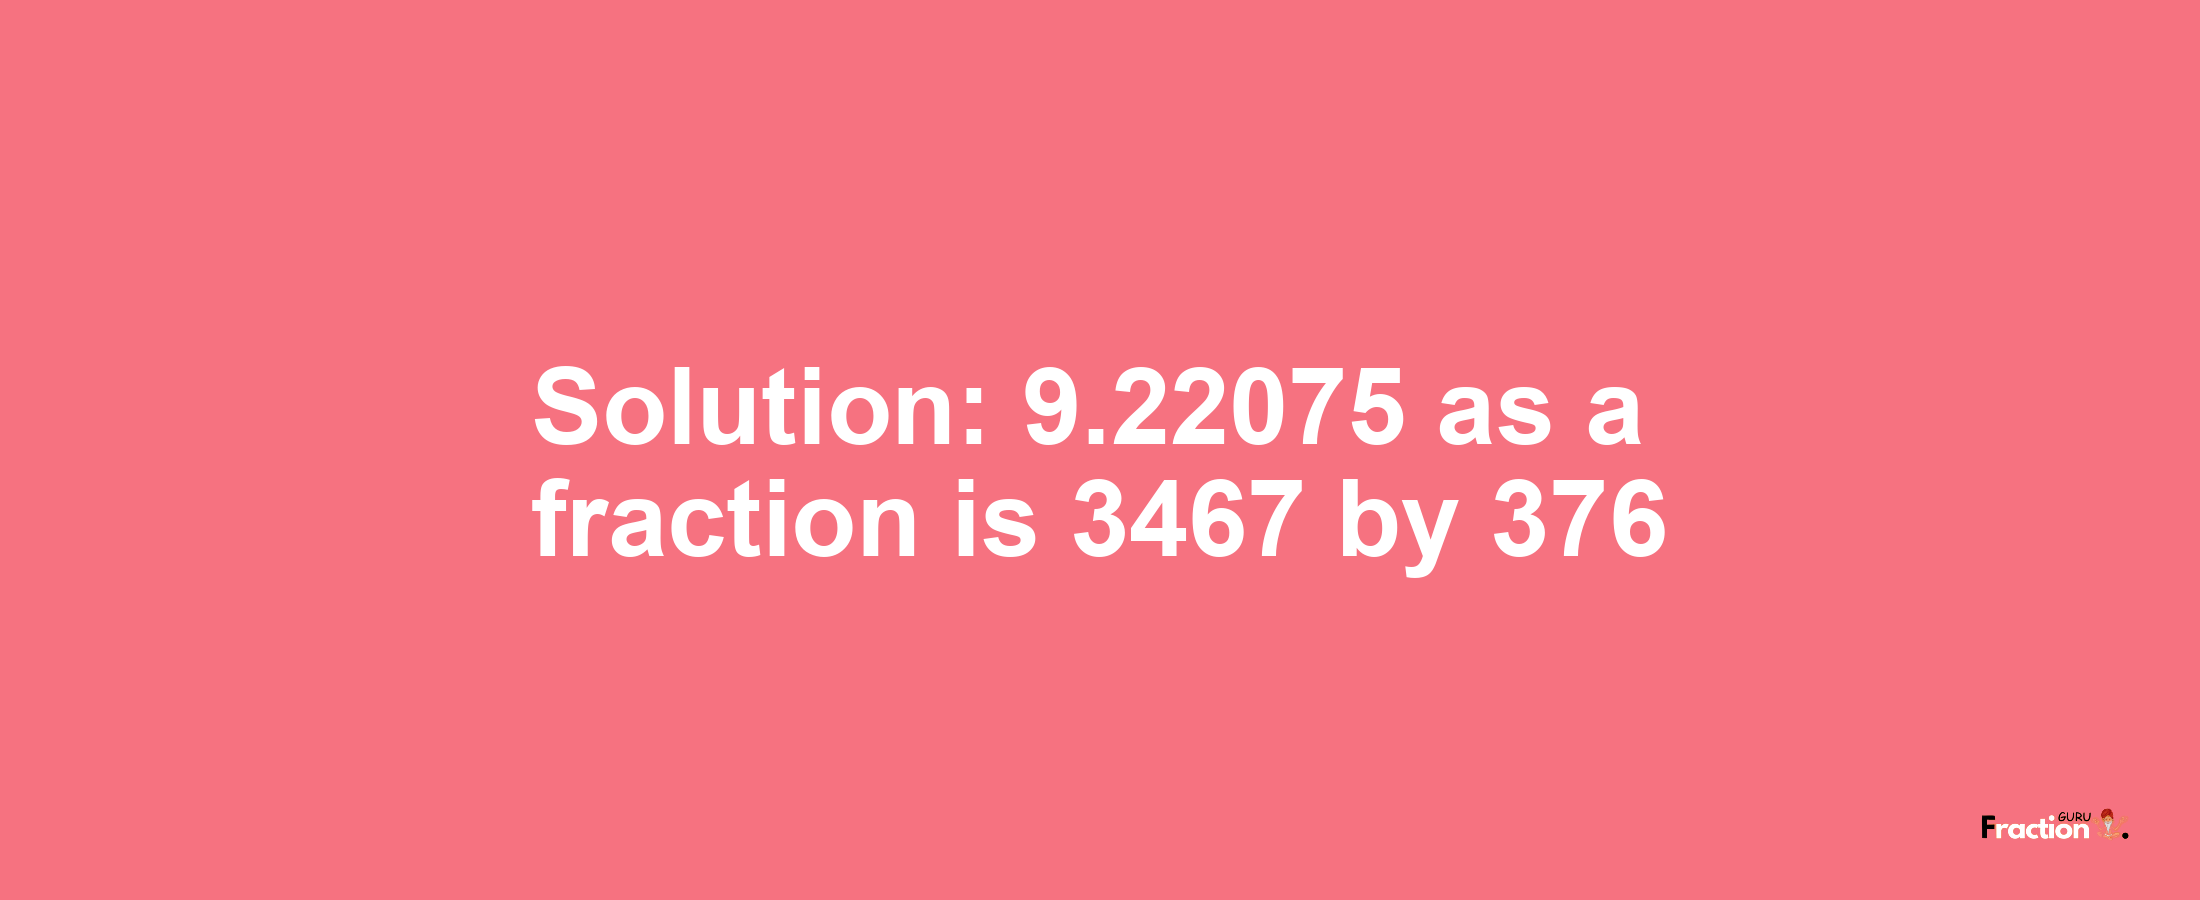 Solution:9.22075 as a fraction is 3467/376